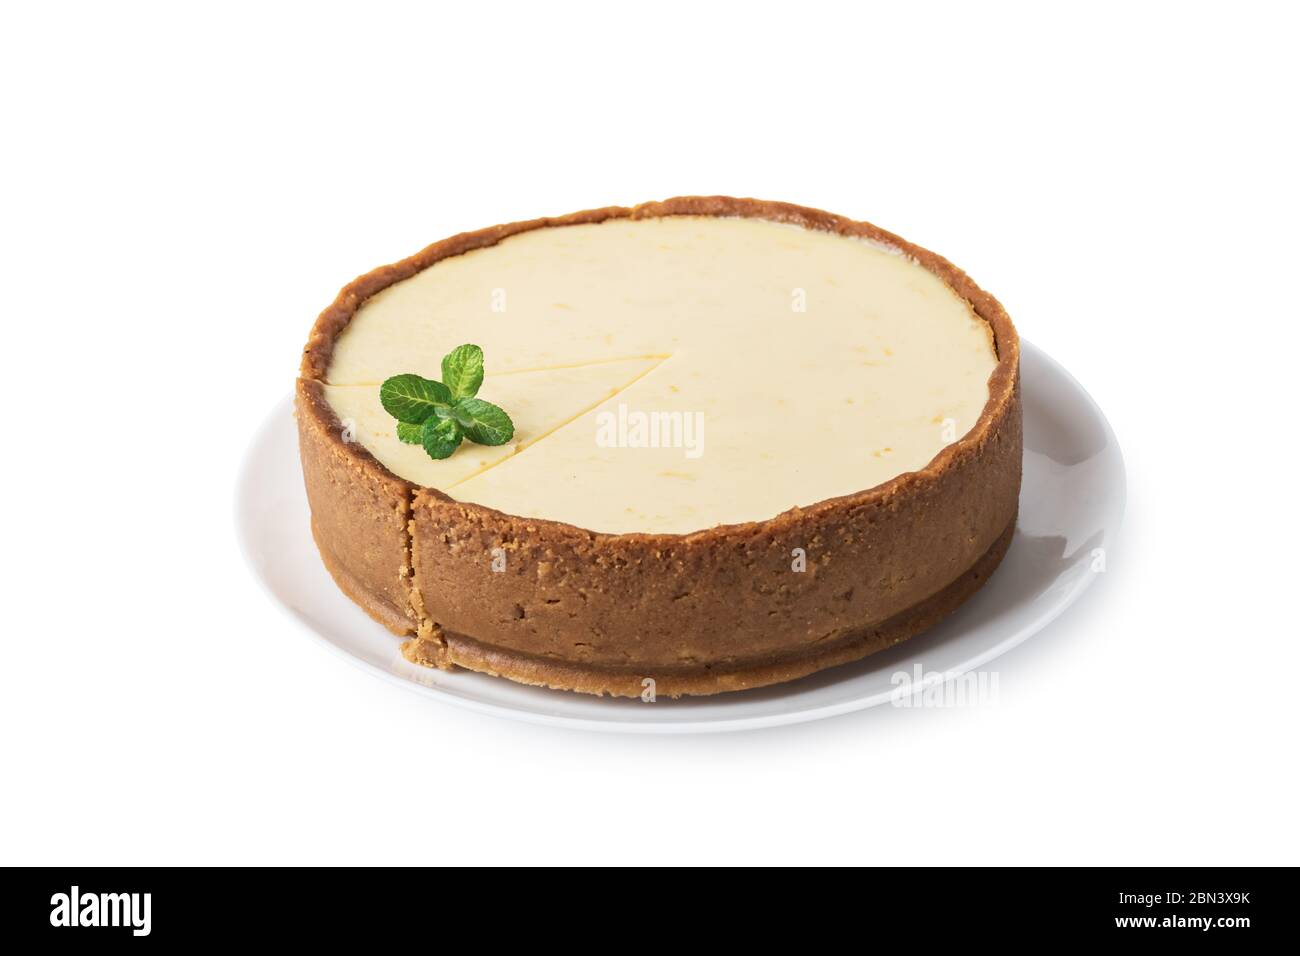 Plane round classic New York cheesecake with sprig of mint on a plate isolated on white background Stock Photo